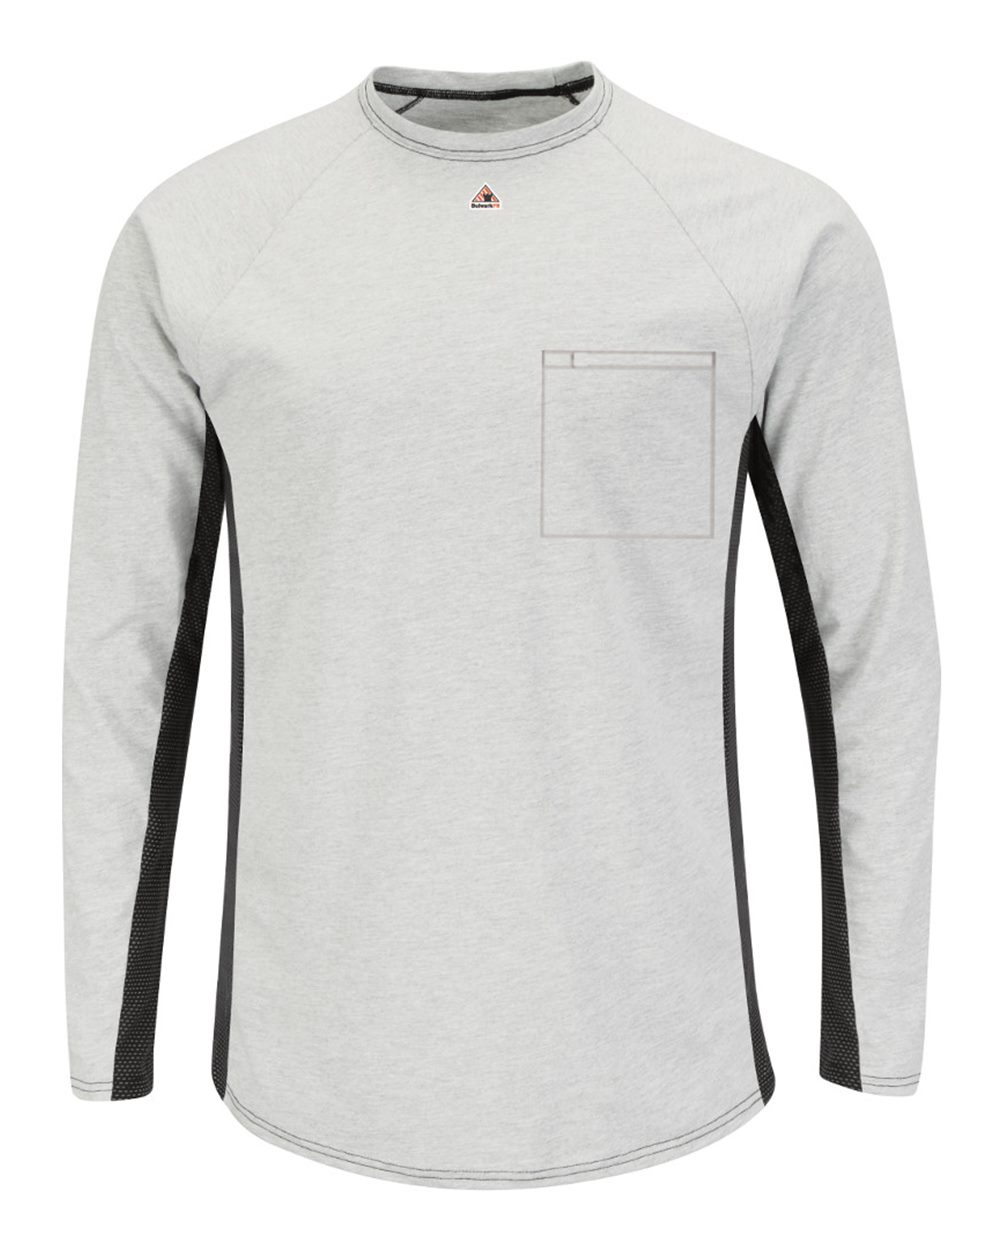 Long Sleeve FR Two-Tone Base Layer with Concealed Chest Pocket - EXCEL FR-Bulwark